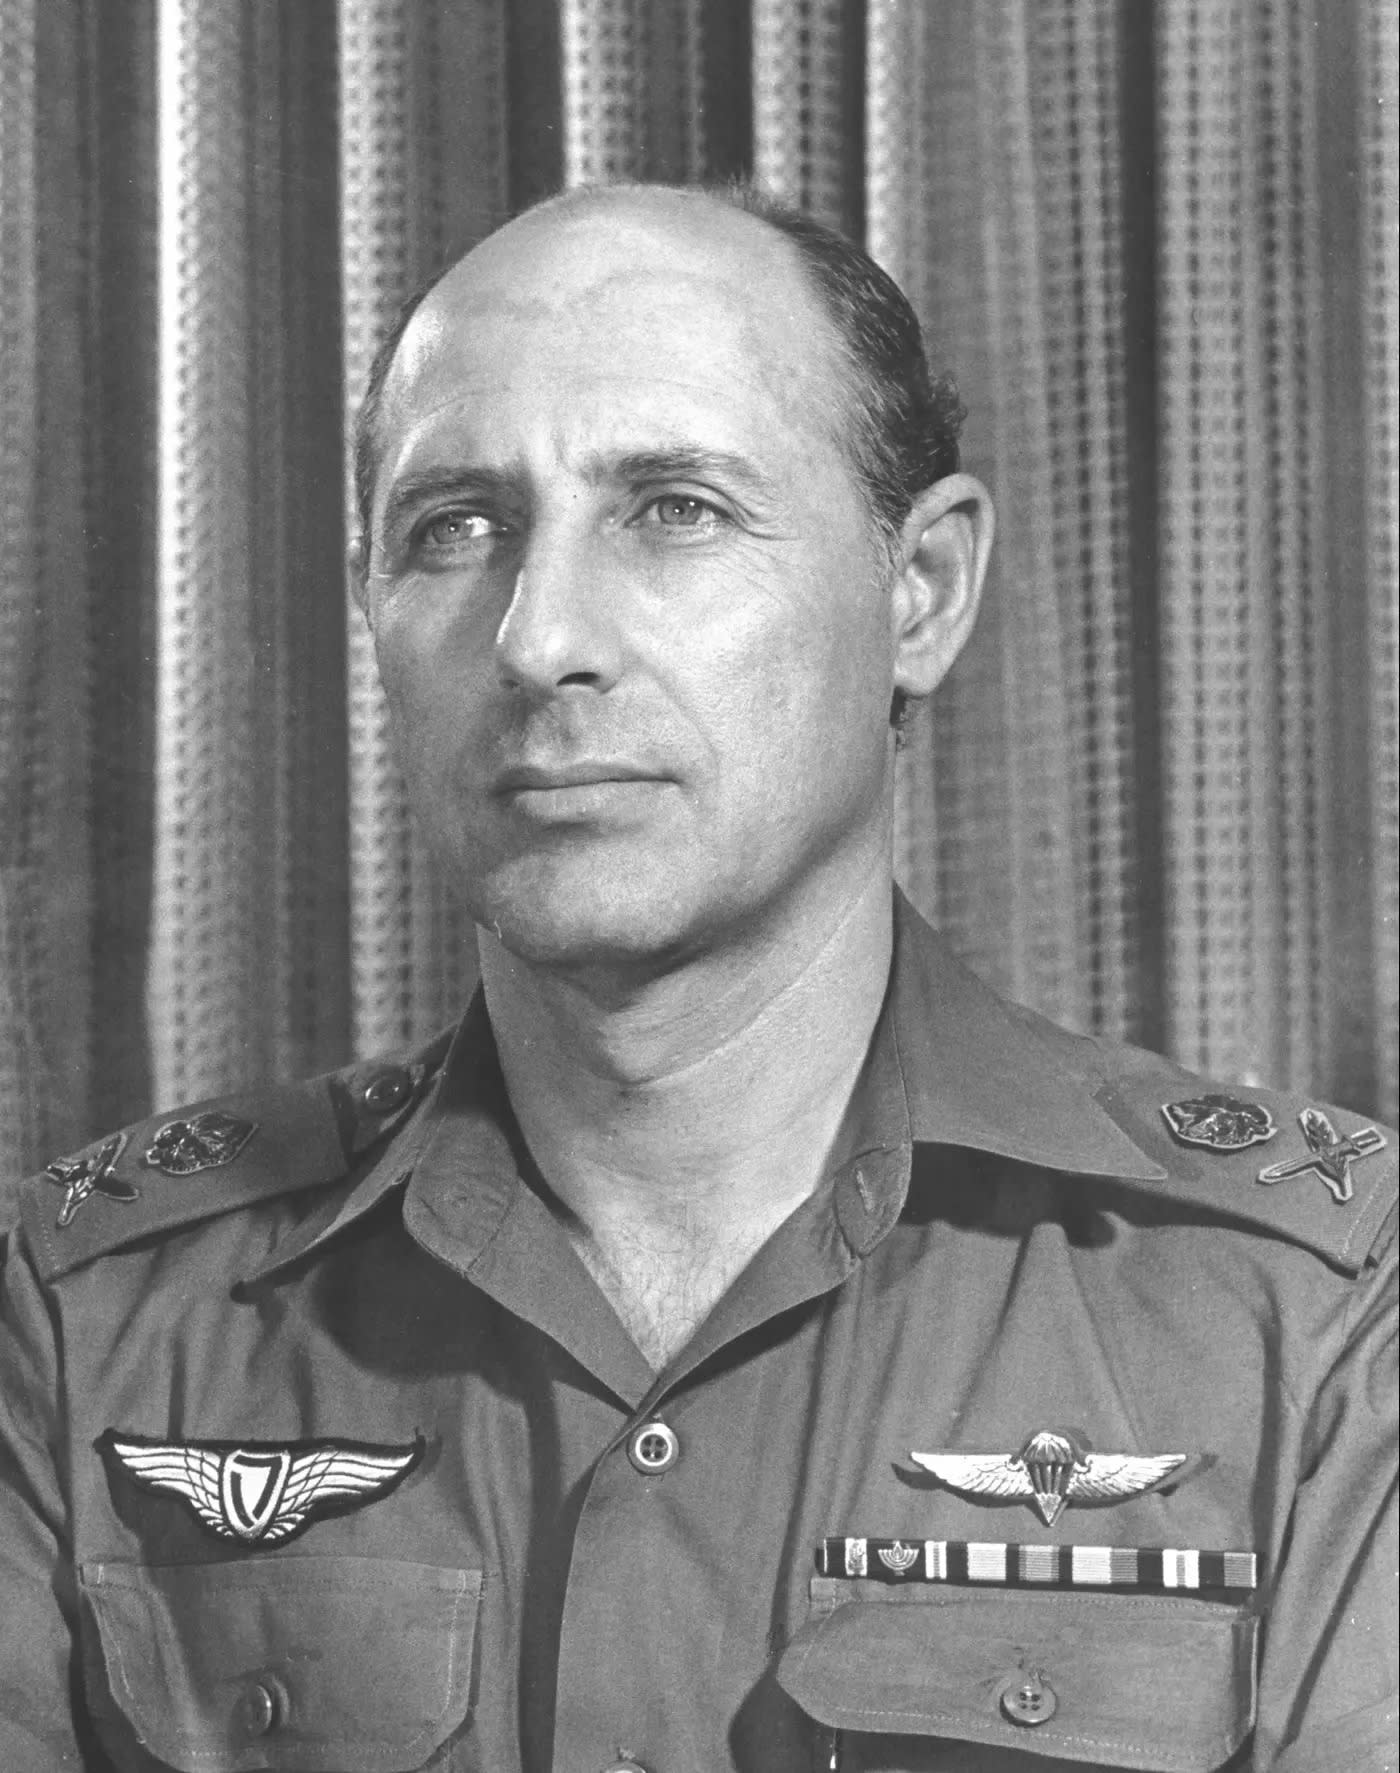  Head of the Military Intelligence Directorate in the Yom Kippur war, Eli Zeira (credit: IDF Spokesperson Courtesy of the IDF Archives in the Ministry of Defense)